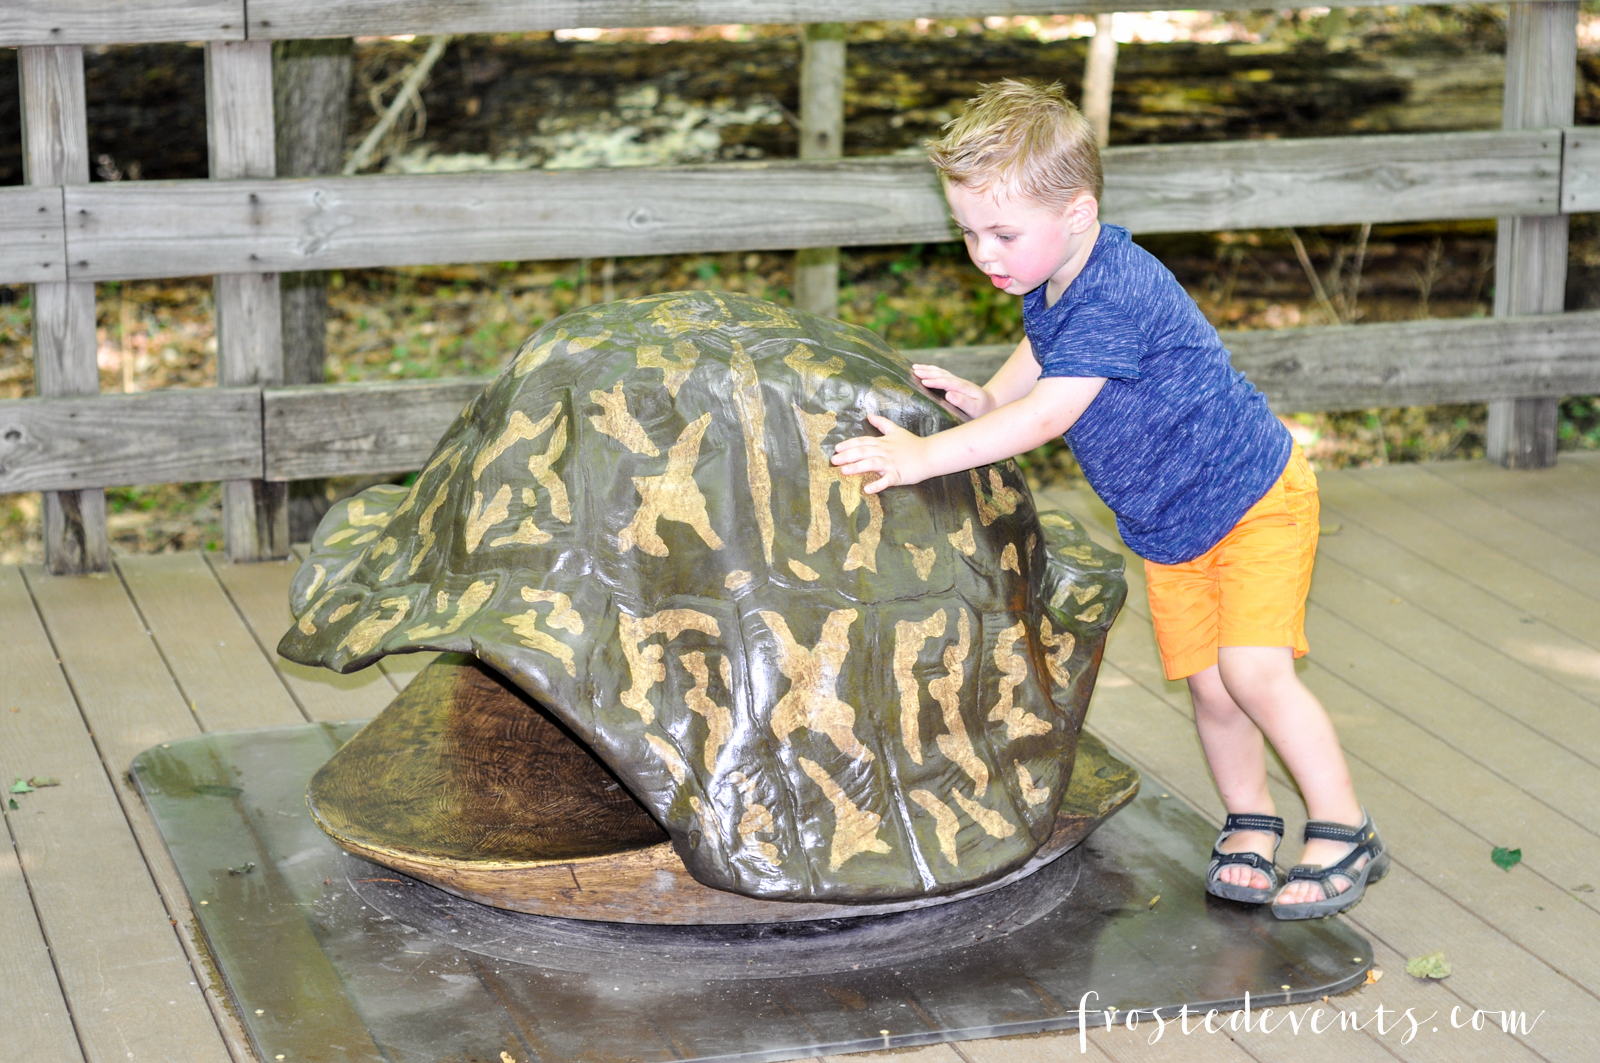 Things to do in Baltimore Maryland Zoo fun for kids Free Zoo Pass FritoLay mommy blog frostedevents.com @frostedevents 